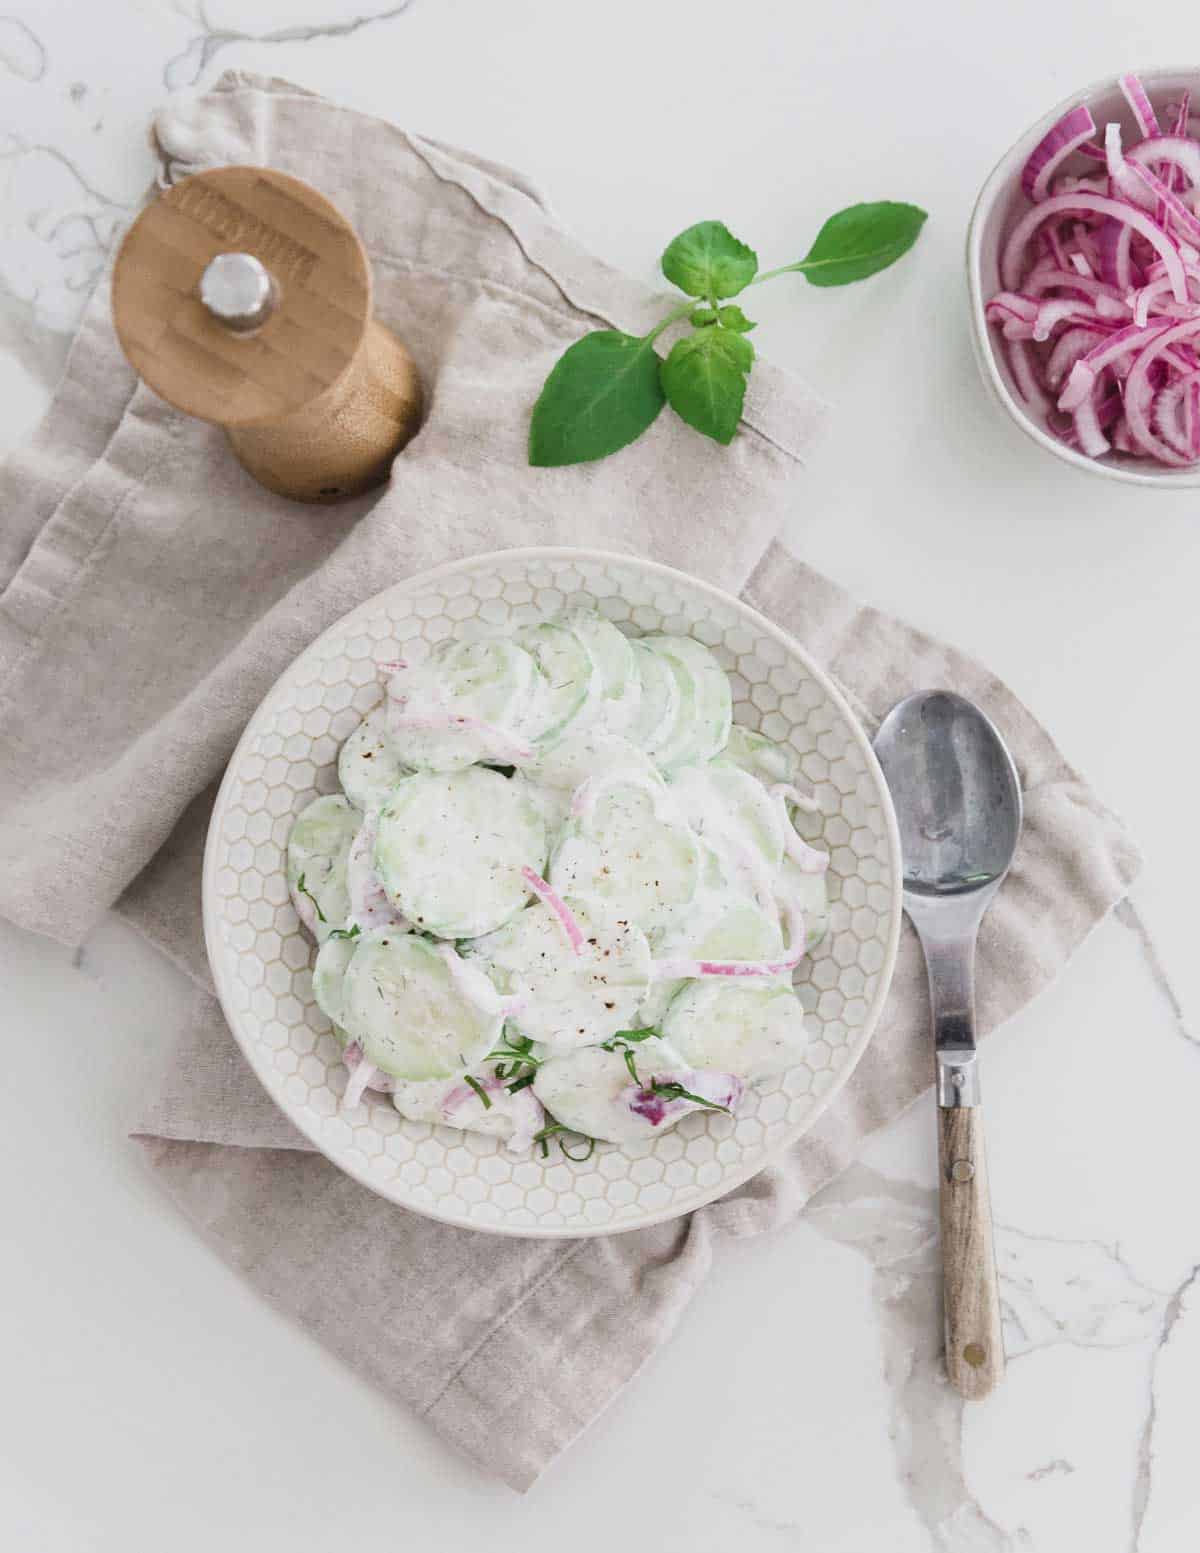 The best creamy cucumber salad is easy to whip up when you need a simple side dish everyone will love.